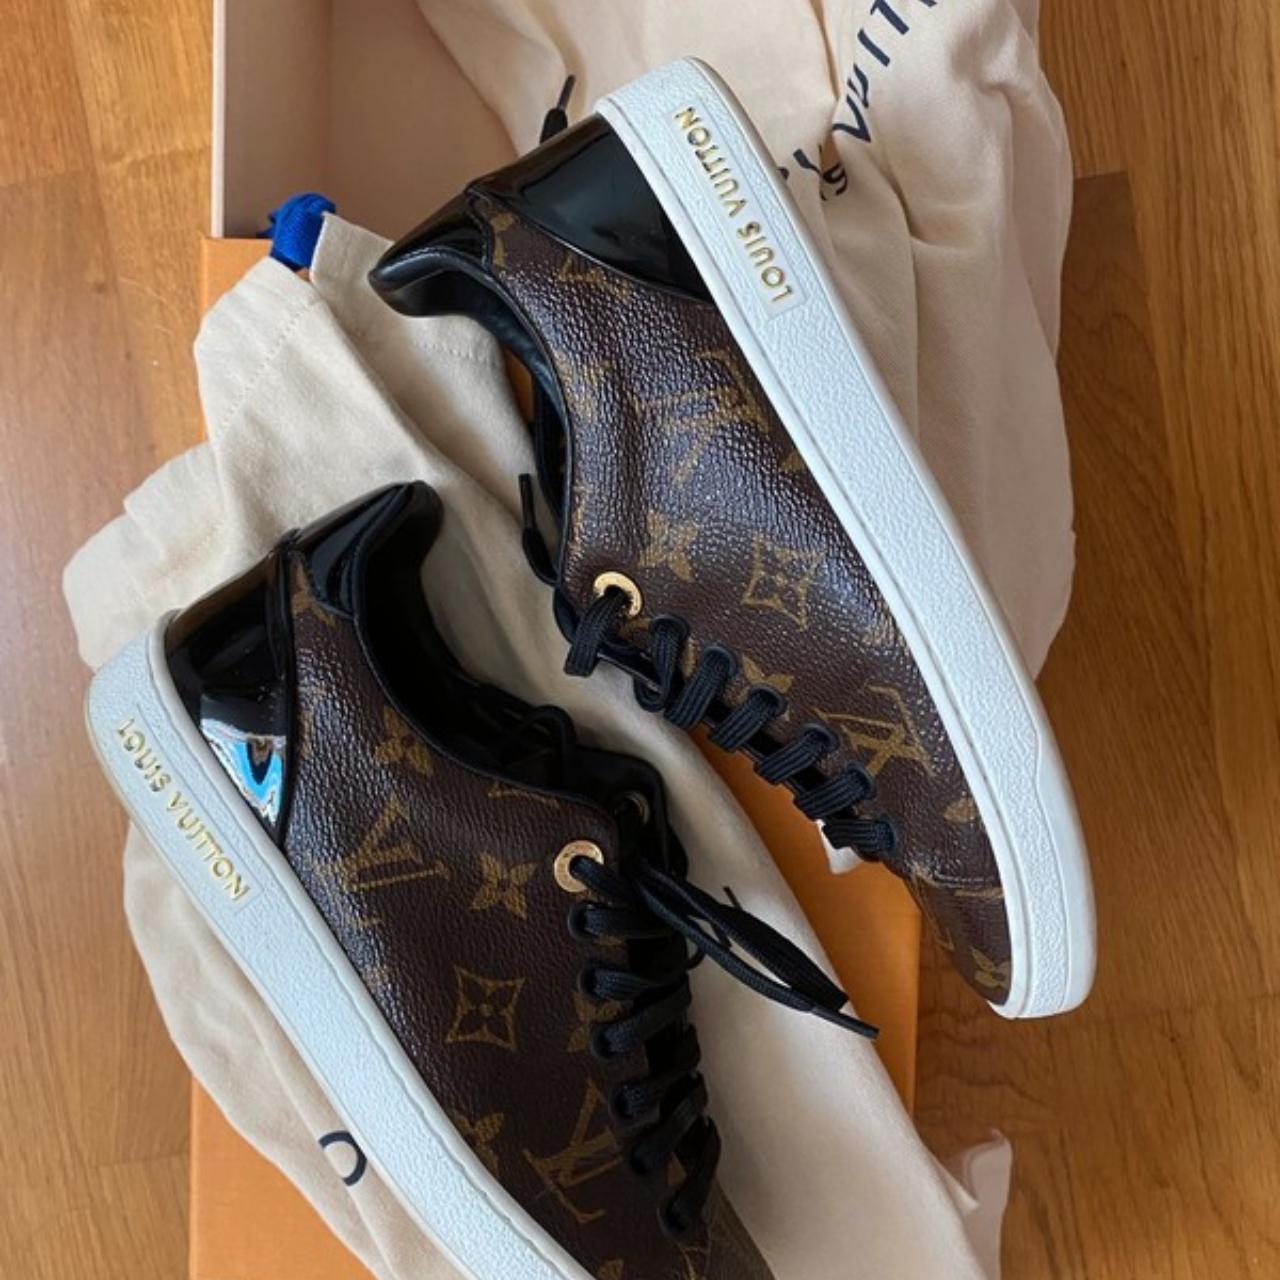 Frontrow cloth trainers Louis Vuitton Brown size 38 EU in Cloth - 37350192